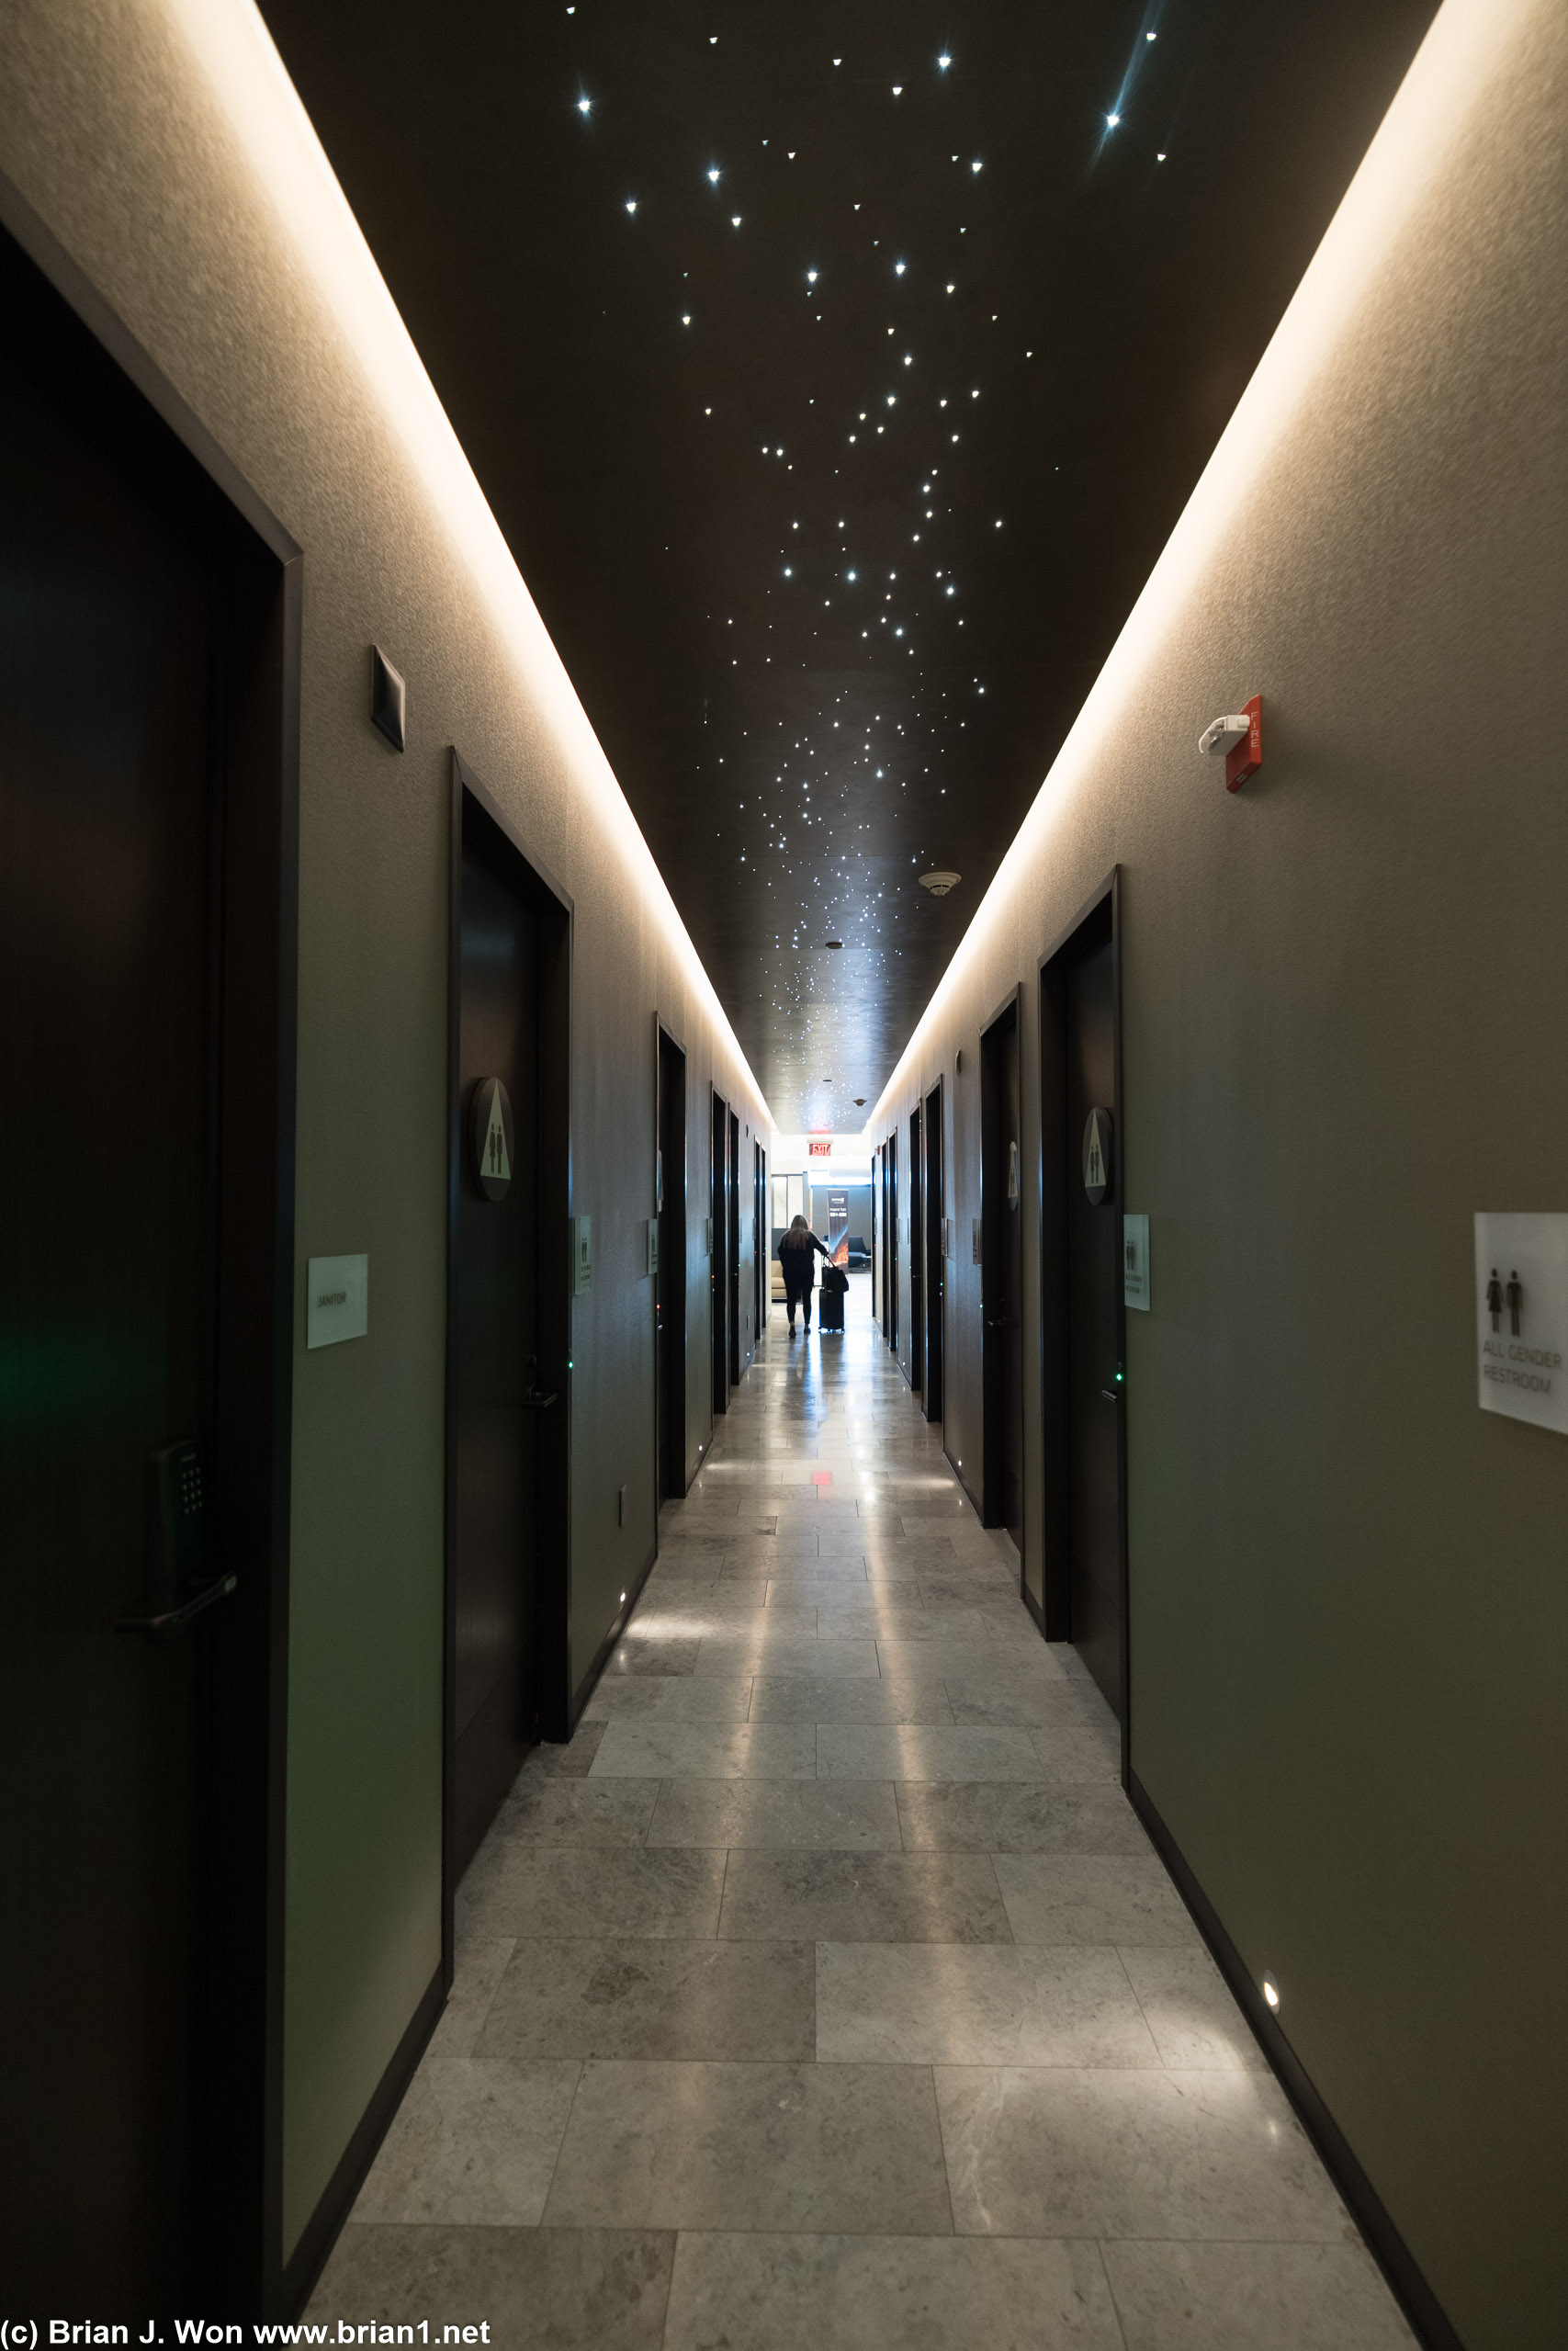 The hallway full of stars (and bathrooms).